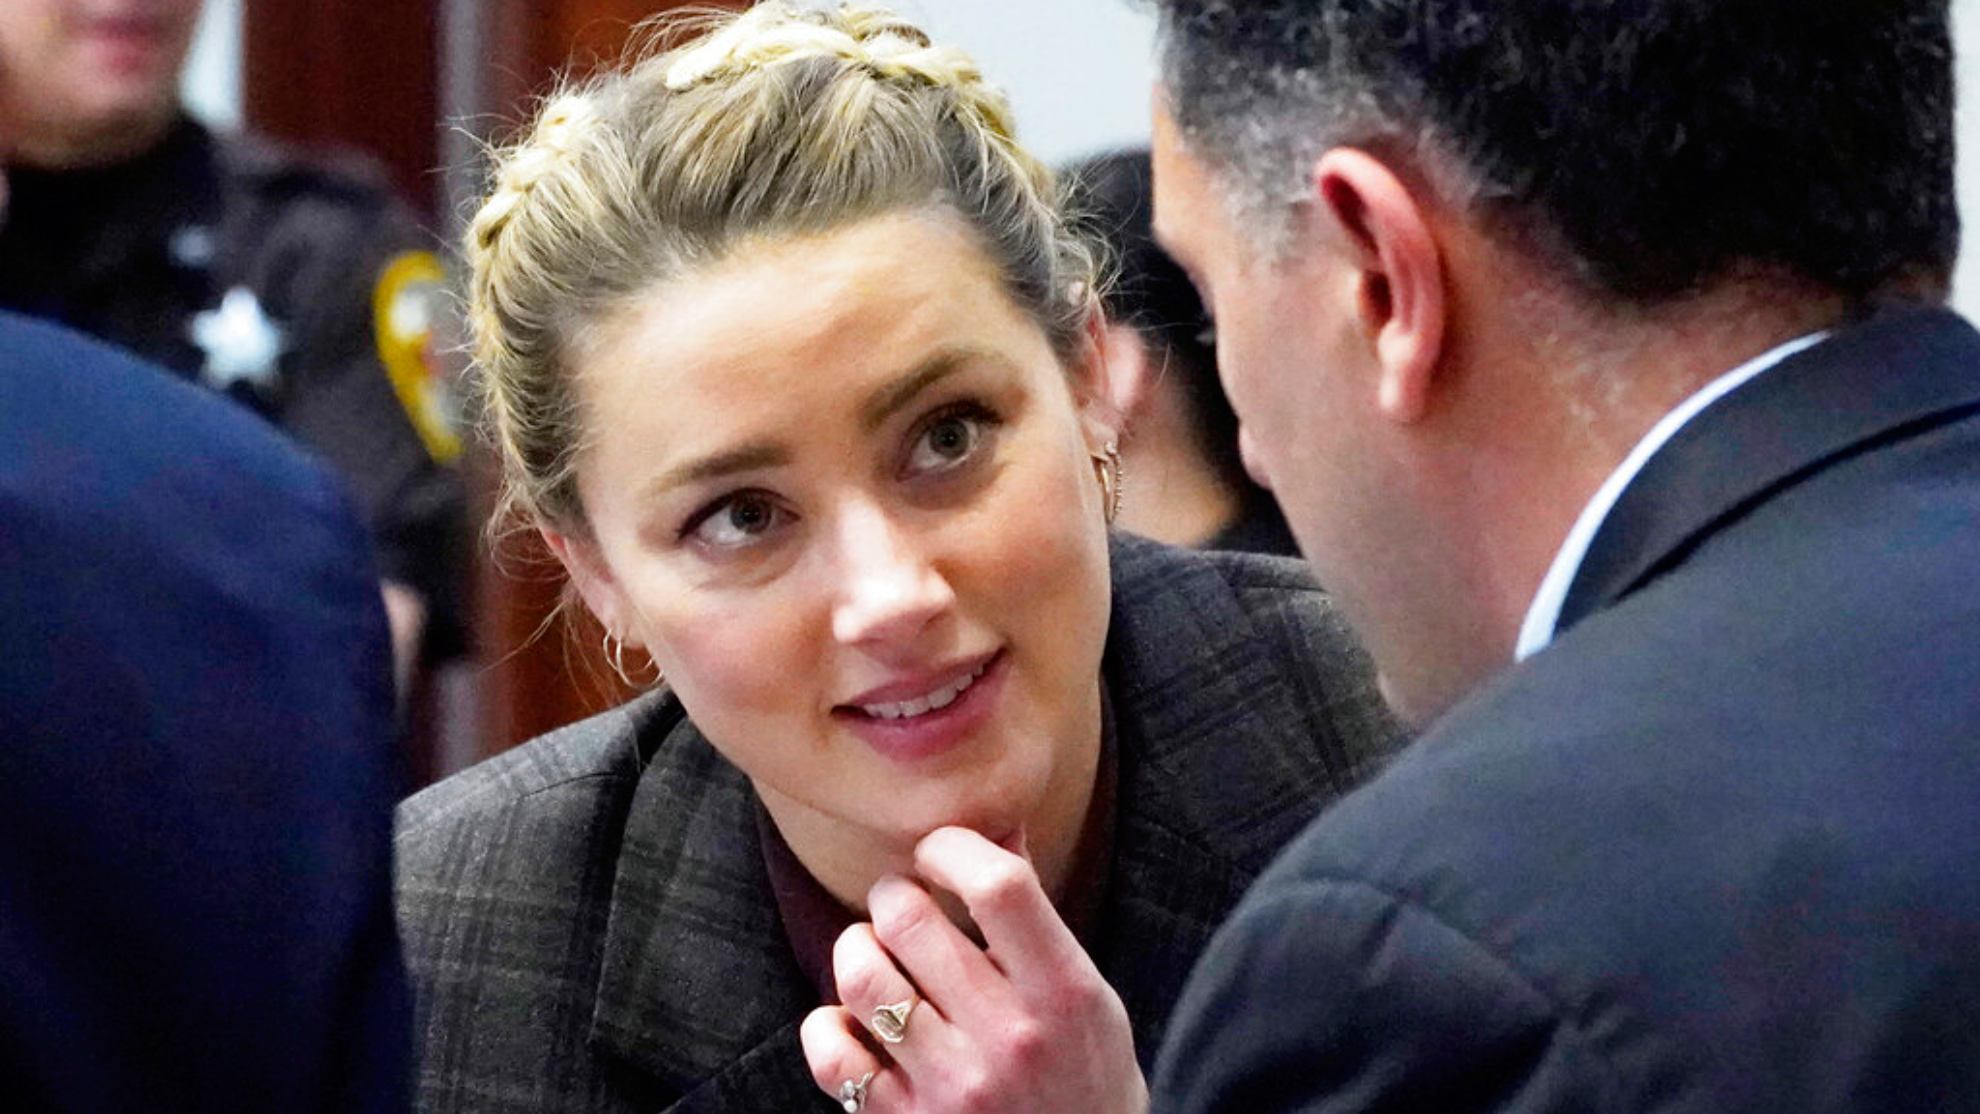 What will happen to Amber Heard if Johnny Depp wins the libel trial?